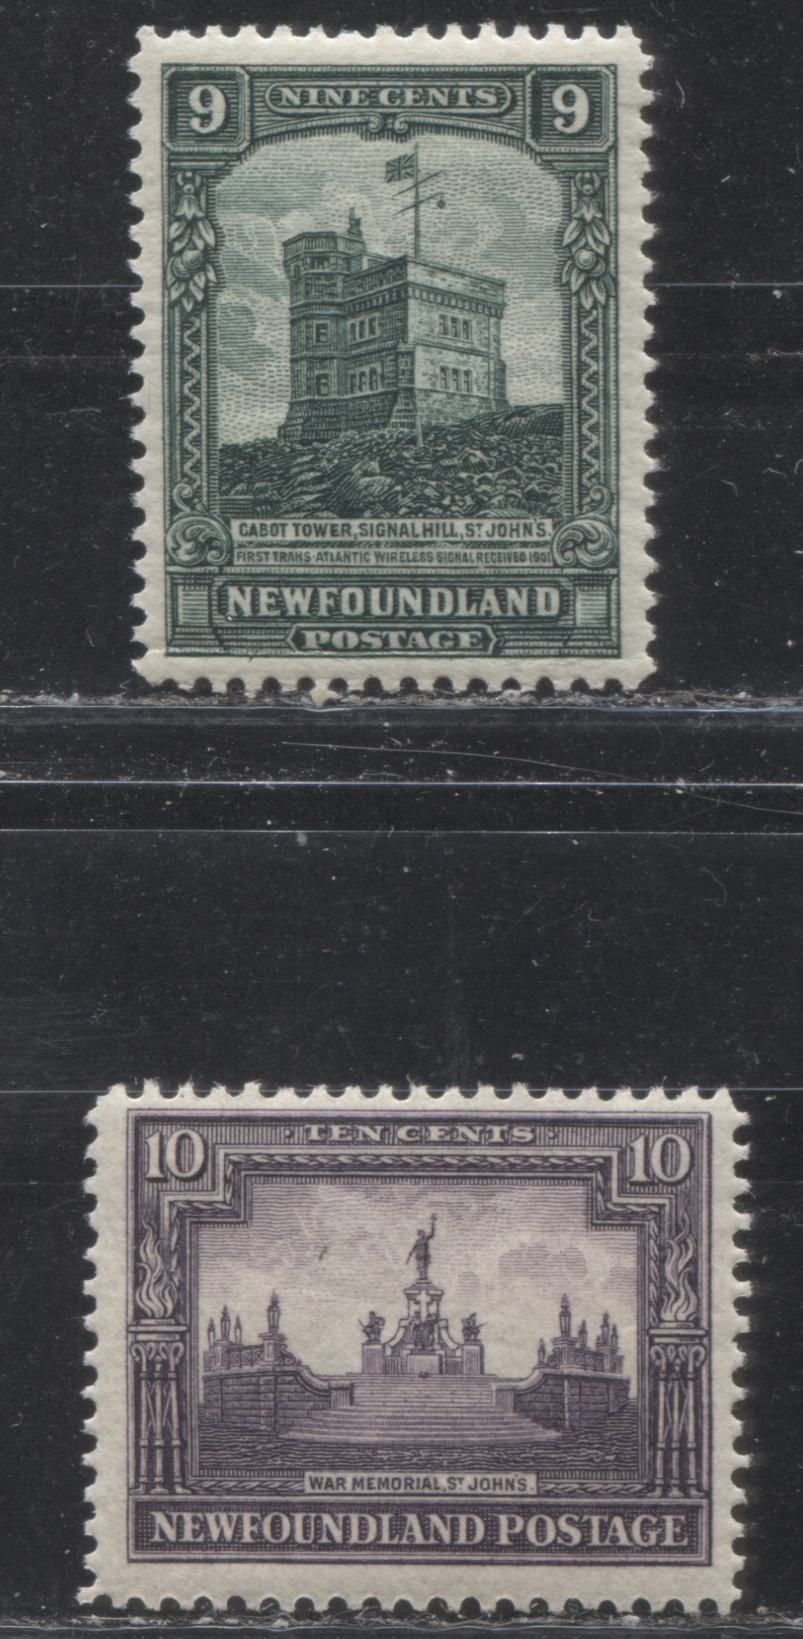 Lot 69 Newfoundland # 152-153 9c & 10c Deep Myrtle Green & Deep Violet Cabot Tower & War Memorial, 1928-1929 Publicity Issue, Two Fine NH Examples, Line Perf. 14 x 14.2 and 14